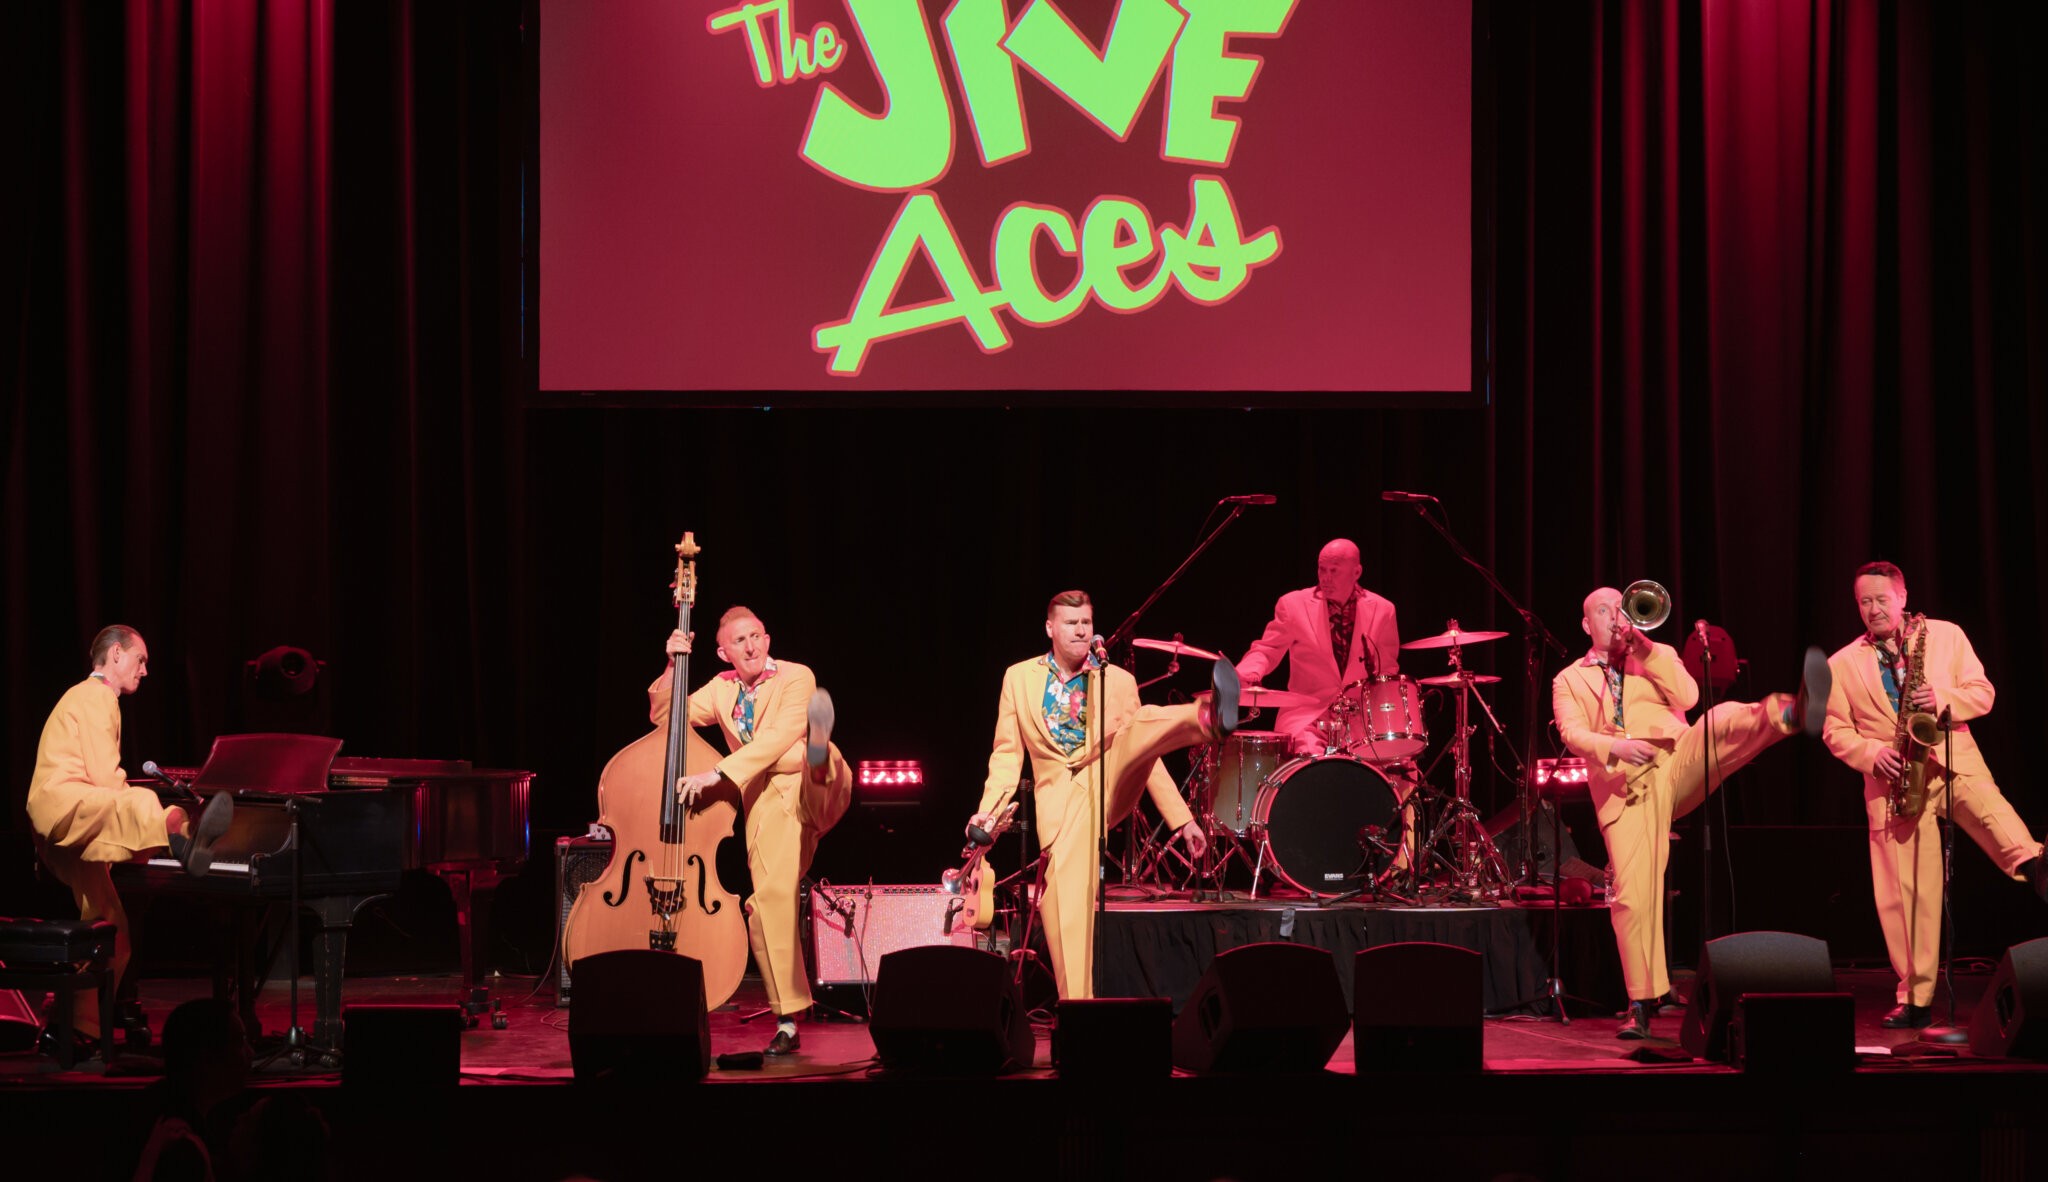 The Jive Aces at The Suffolk